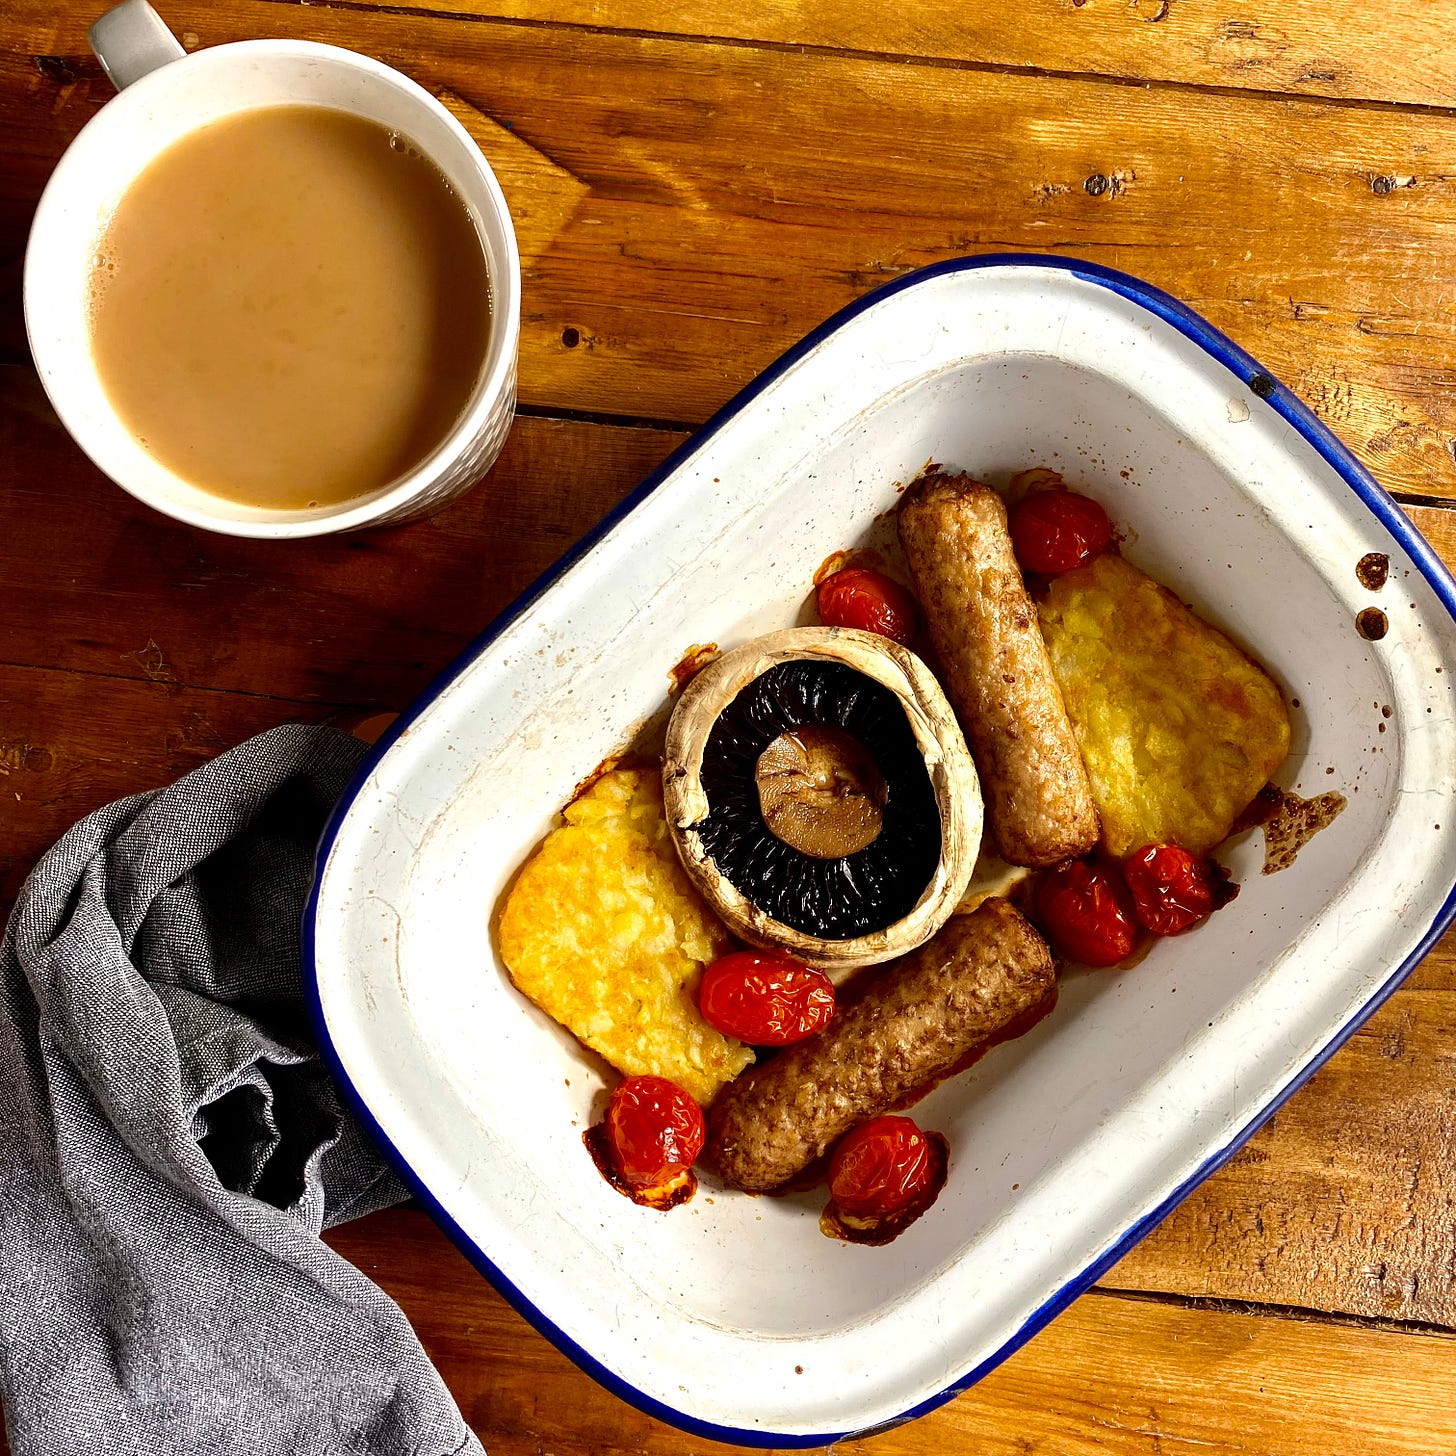 Oven dish with hash browns, mushroom, tomatoes and veggie sausages, a mug of tea to the side